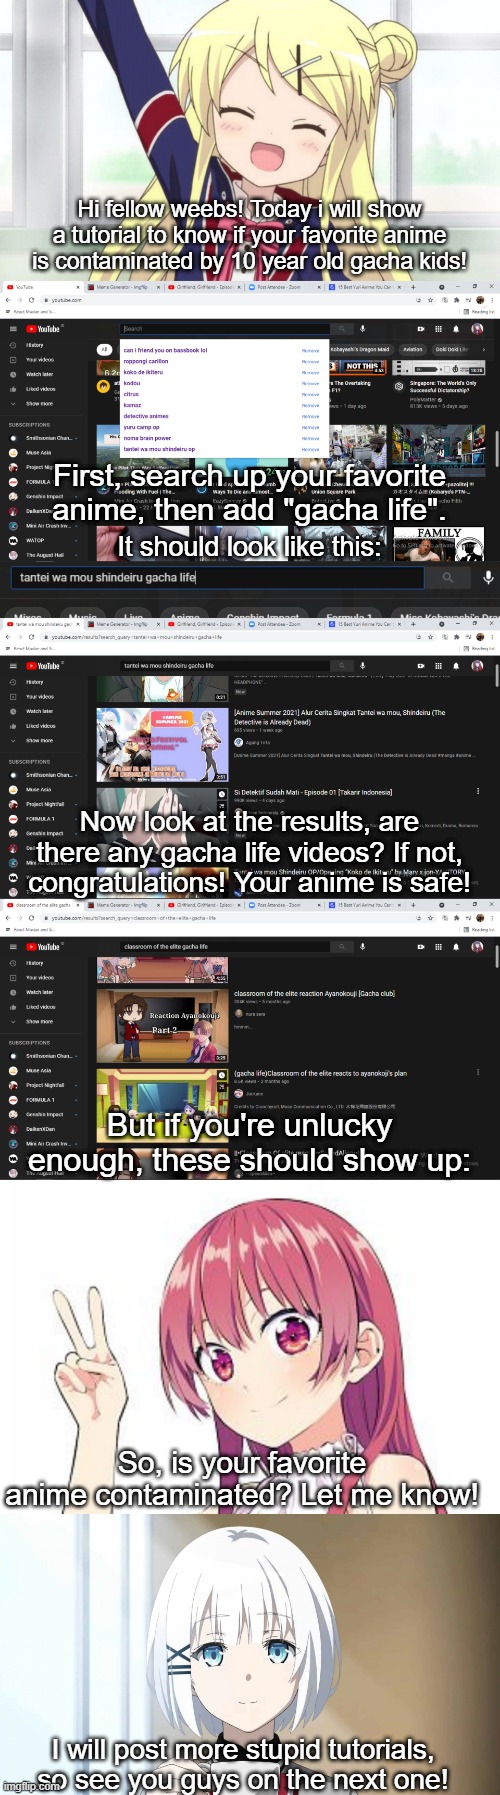 i am stupid | Hi fellow weebs! Today i will show a tutorial to know if your favorite anime is contaminated by 10 year old gacha kids! First, search up your favorite anime, then add "gacha life". It should look like this:; Now look at the results, are there any gacha life videos? If not, congratulations! Your anime is safe! But if you're unlucky enough, these should show up:; So, is your favorite anime contaminated? Let me know! I will post more stupid tutorials, so see you guys on the next one! | image tagged in stupid tutorials with yura agira | made w/ Imgflip meme maker